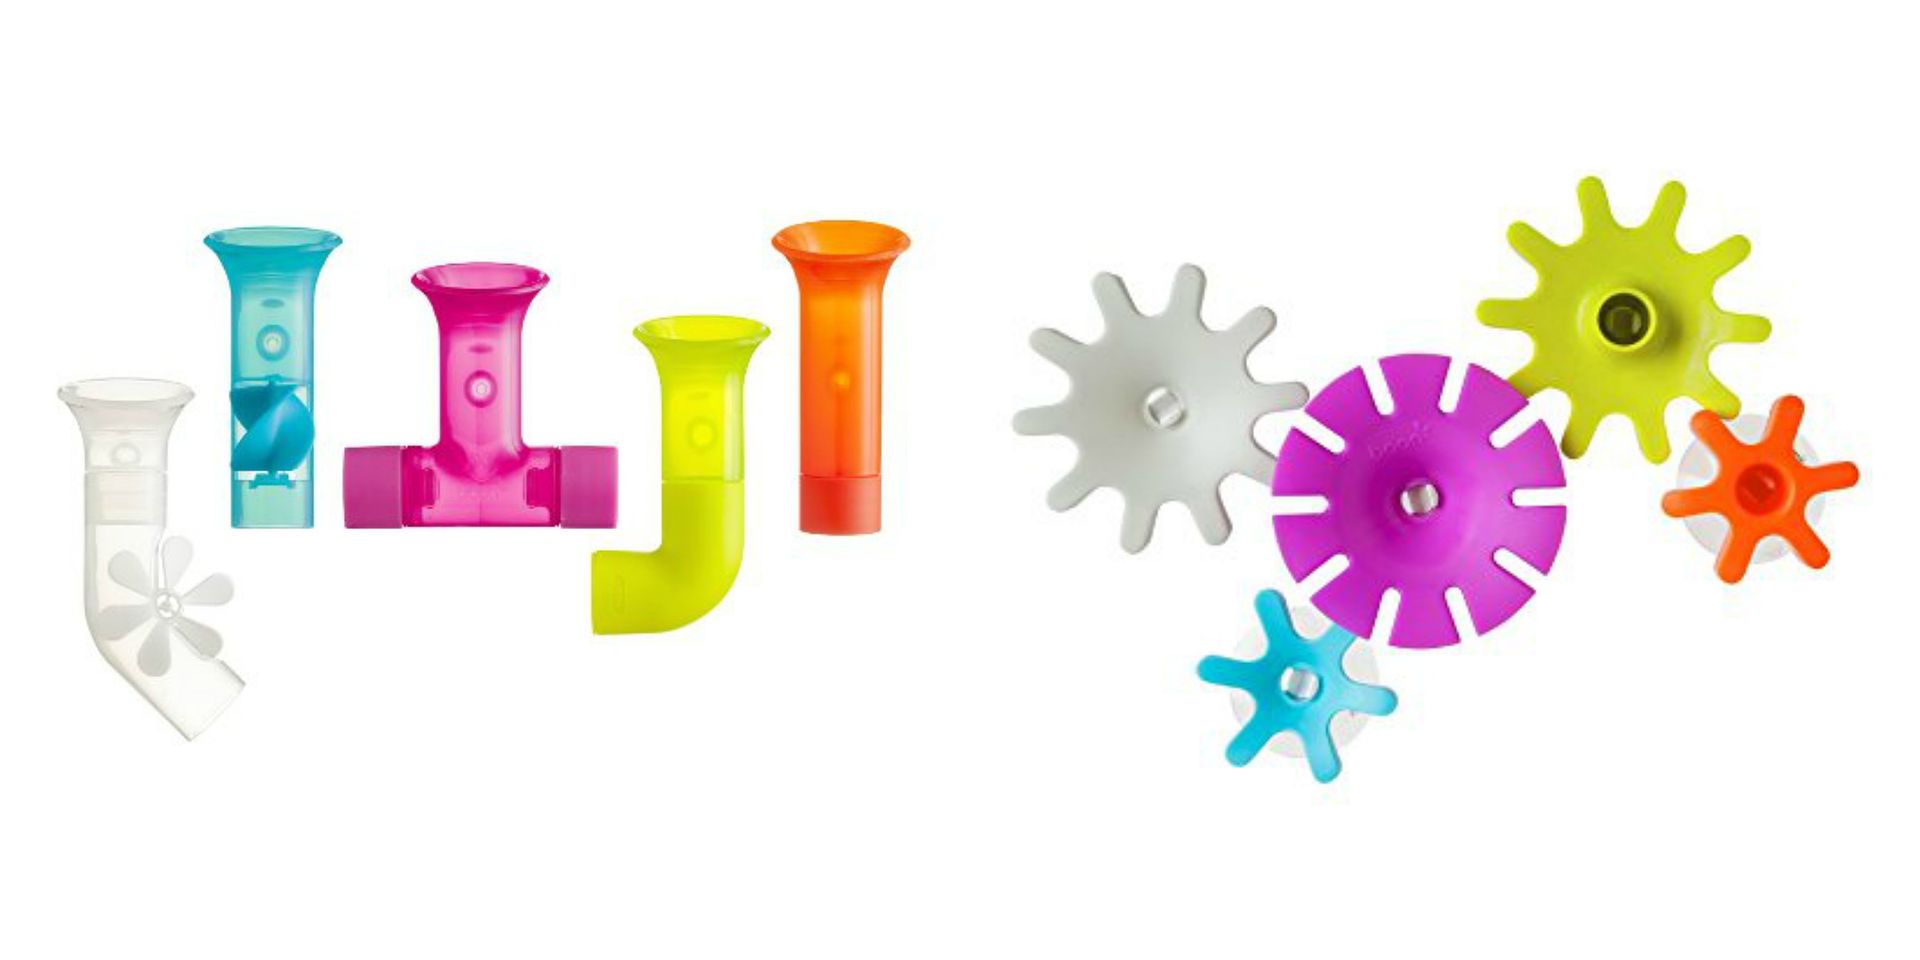 Boon makes such great, vibrant bath toys like these water pipes and gears.